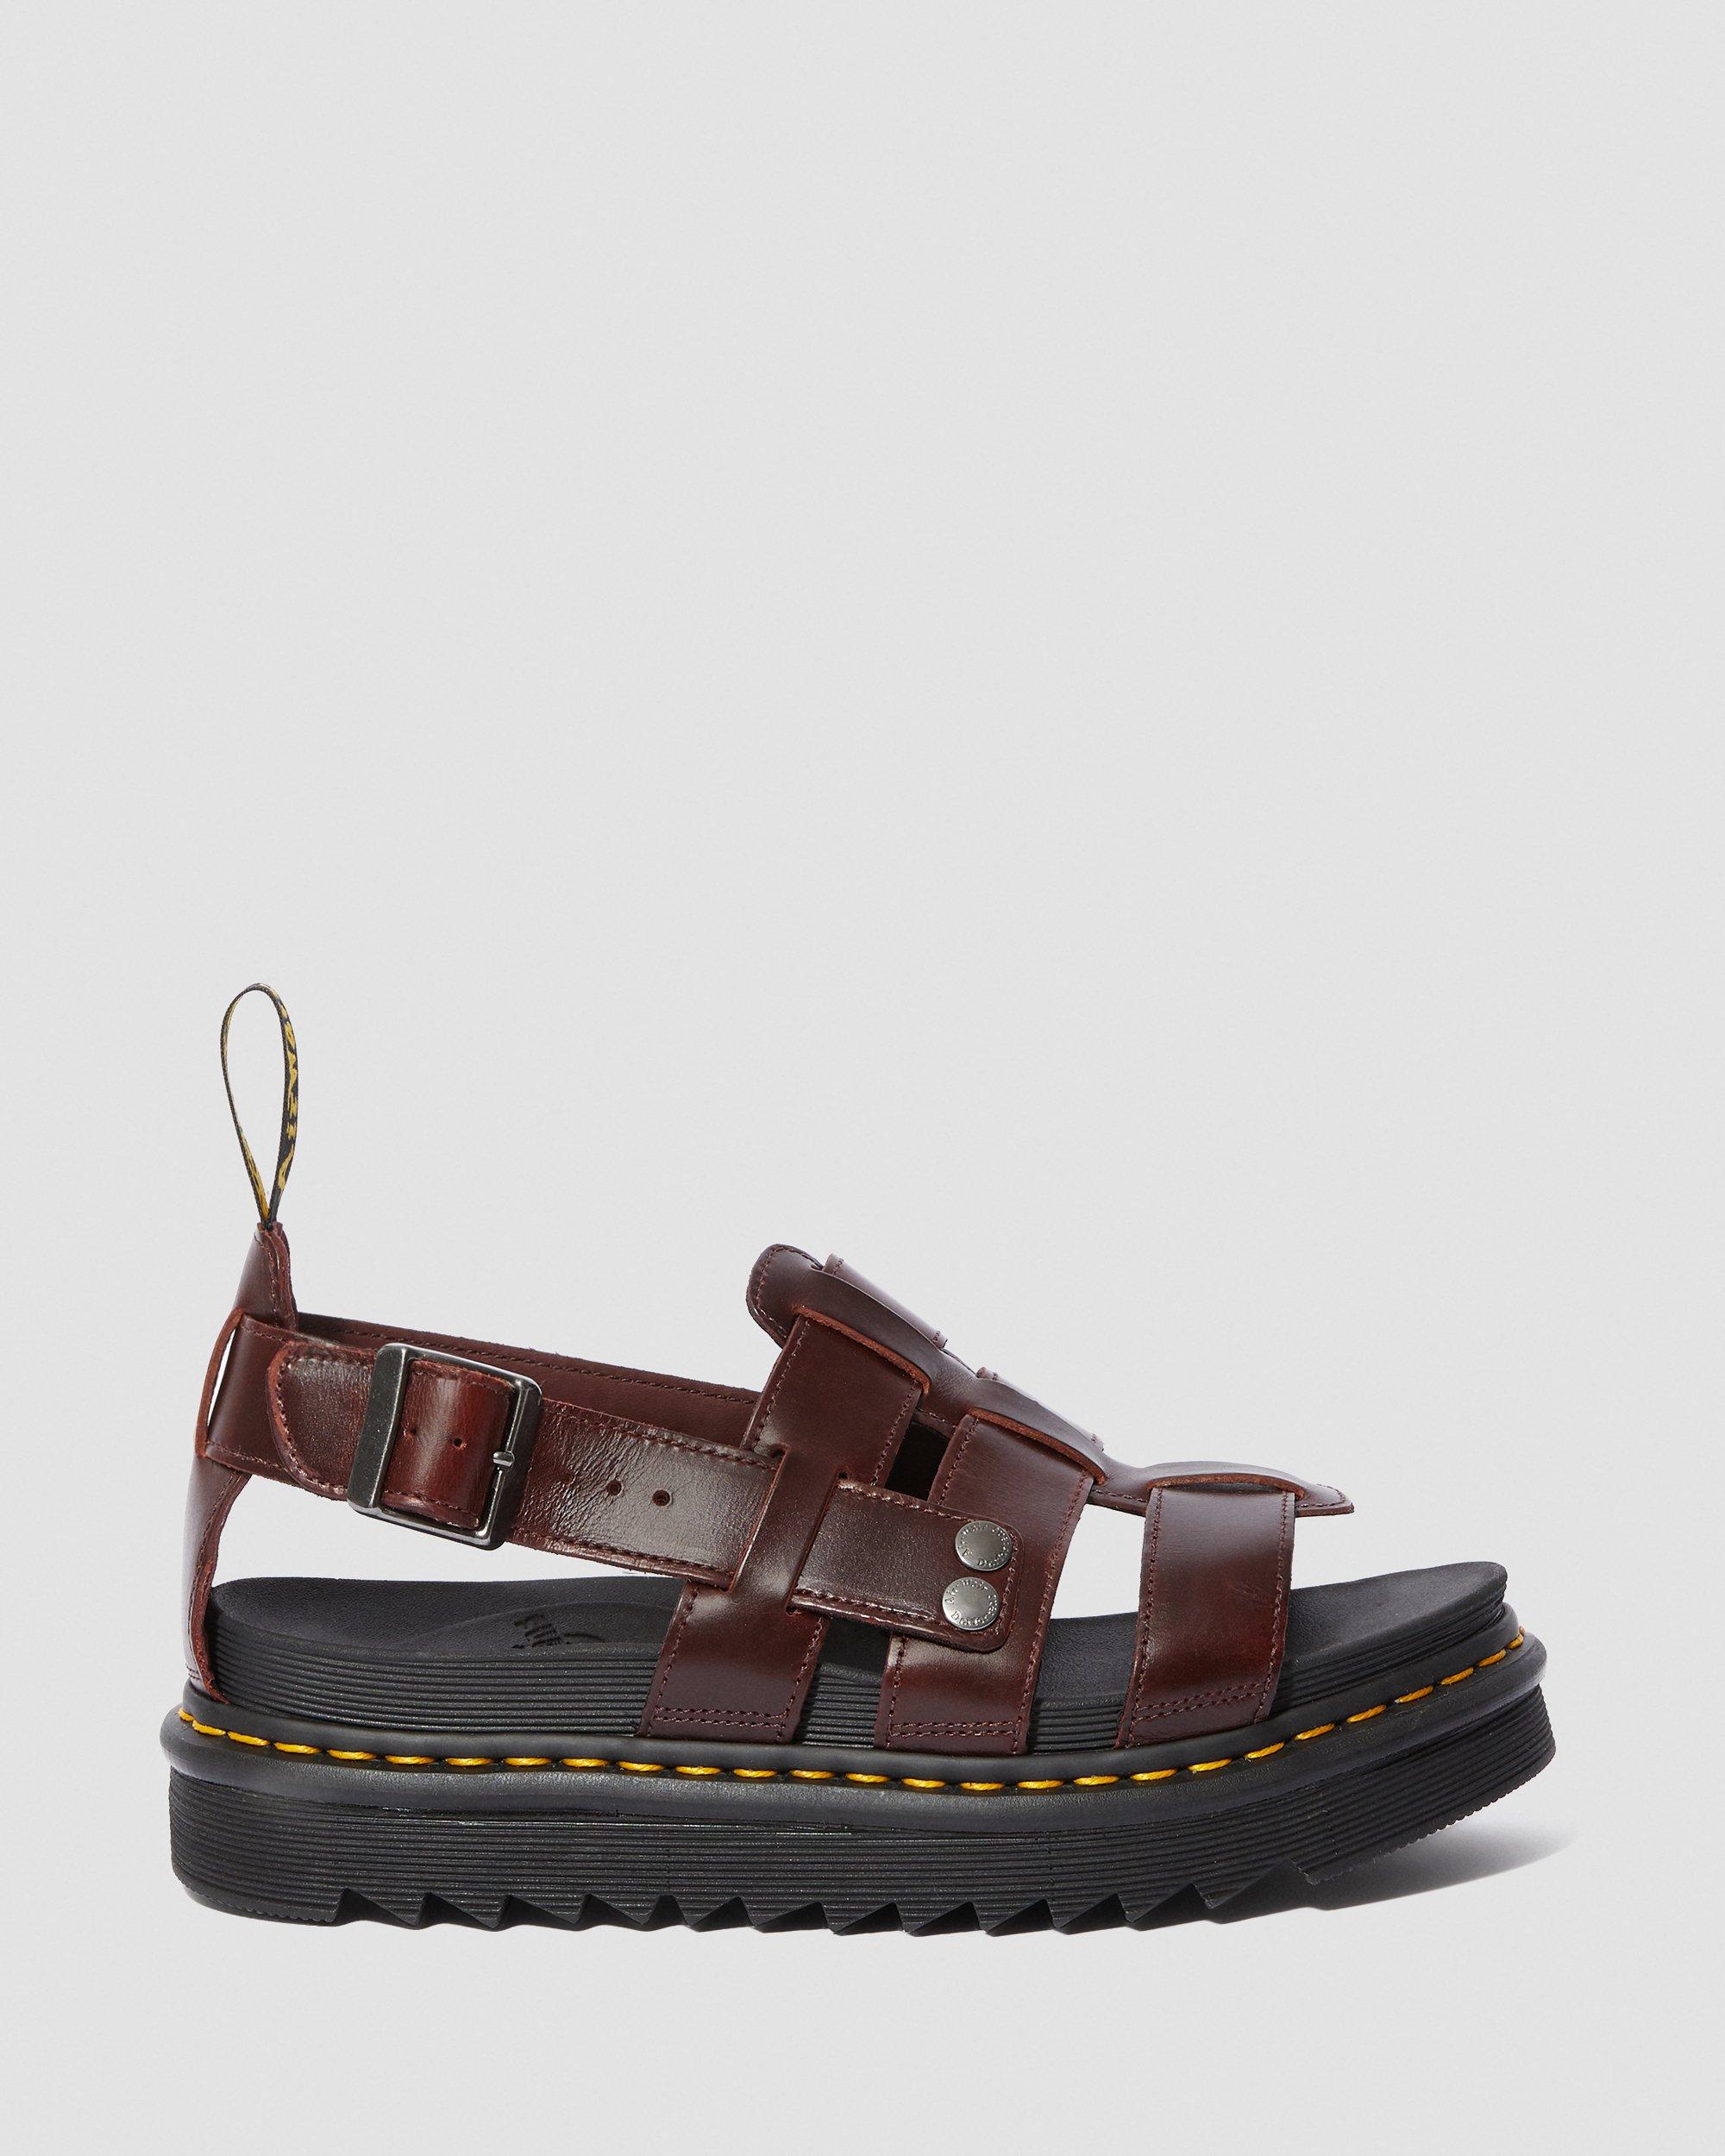 TERRY LEATHER SANDALS | Dr. Martens